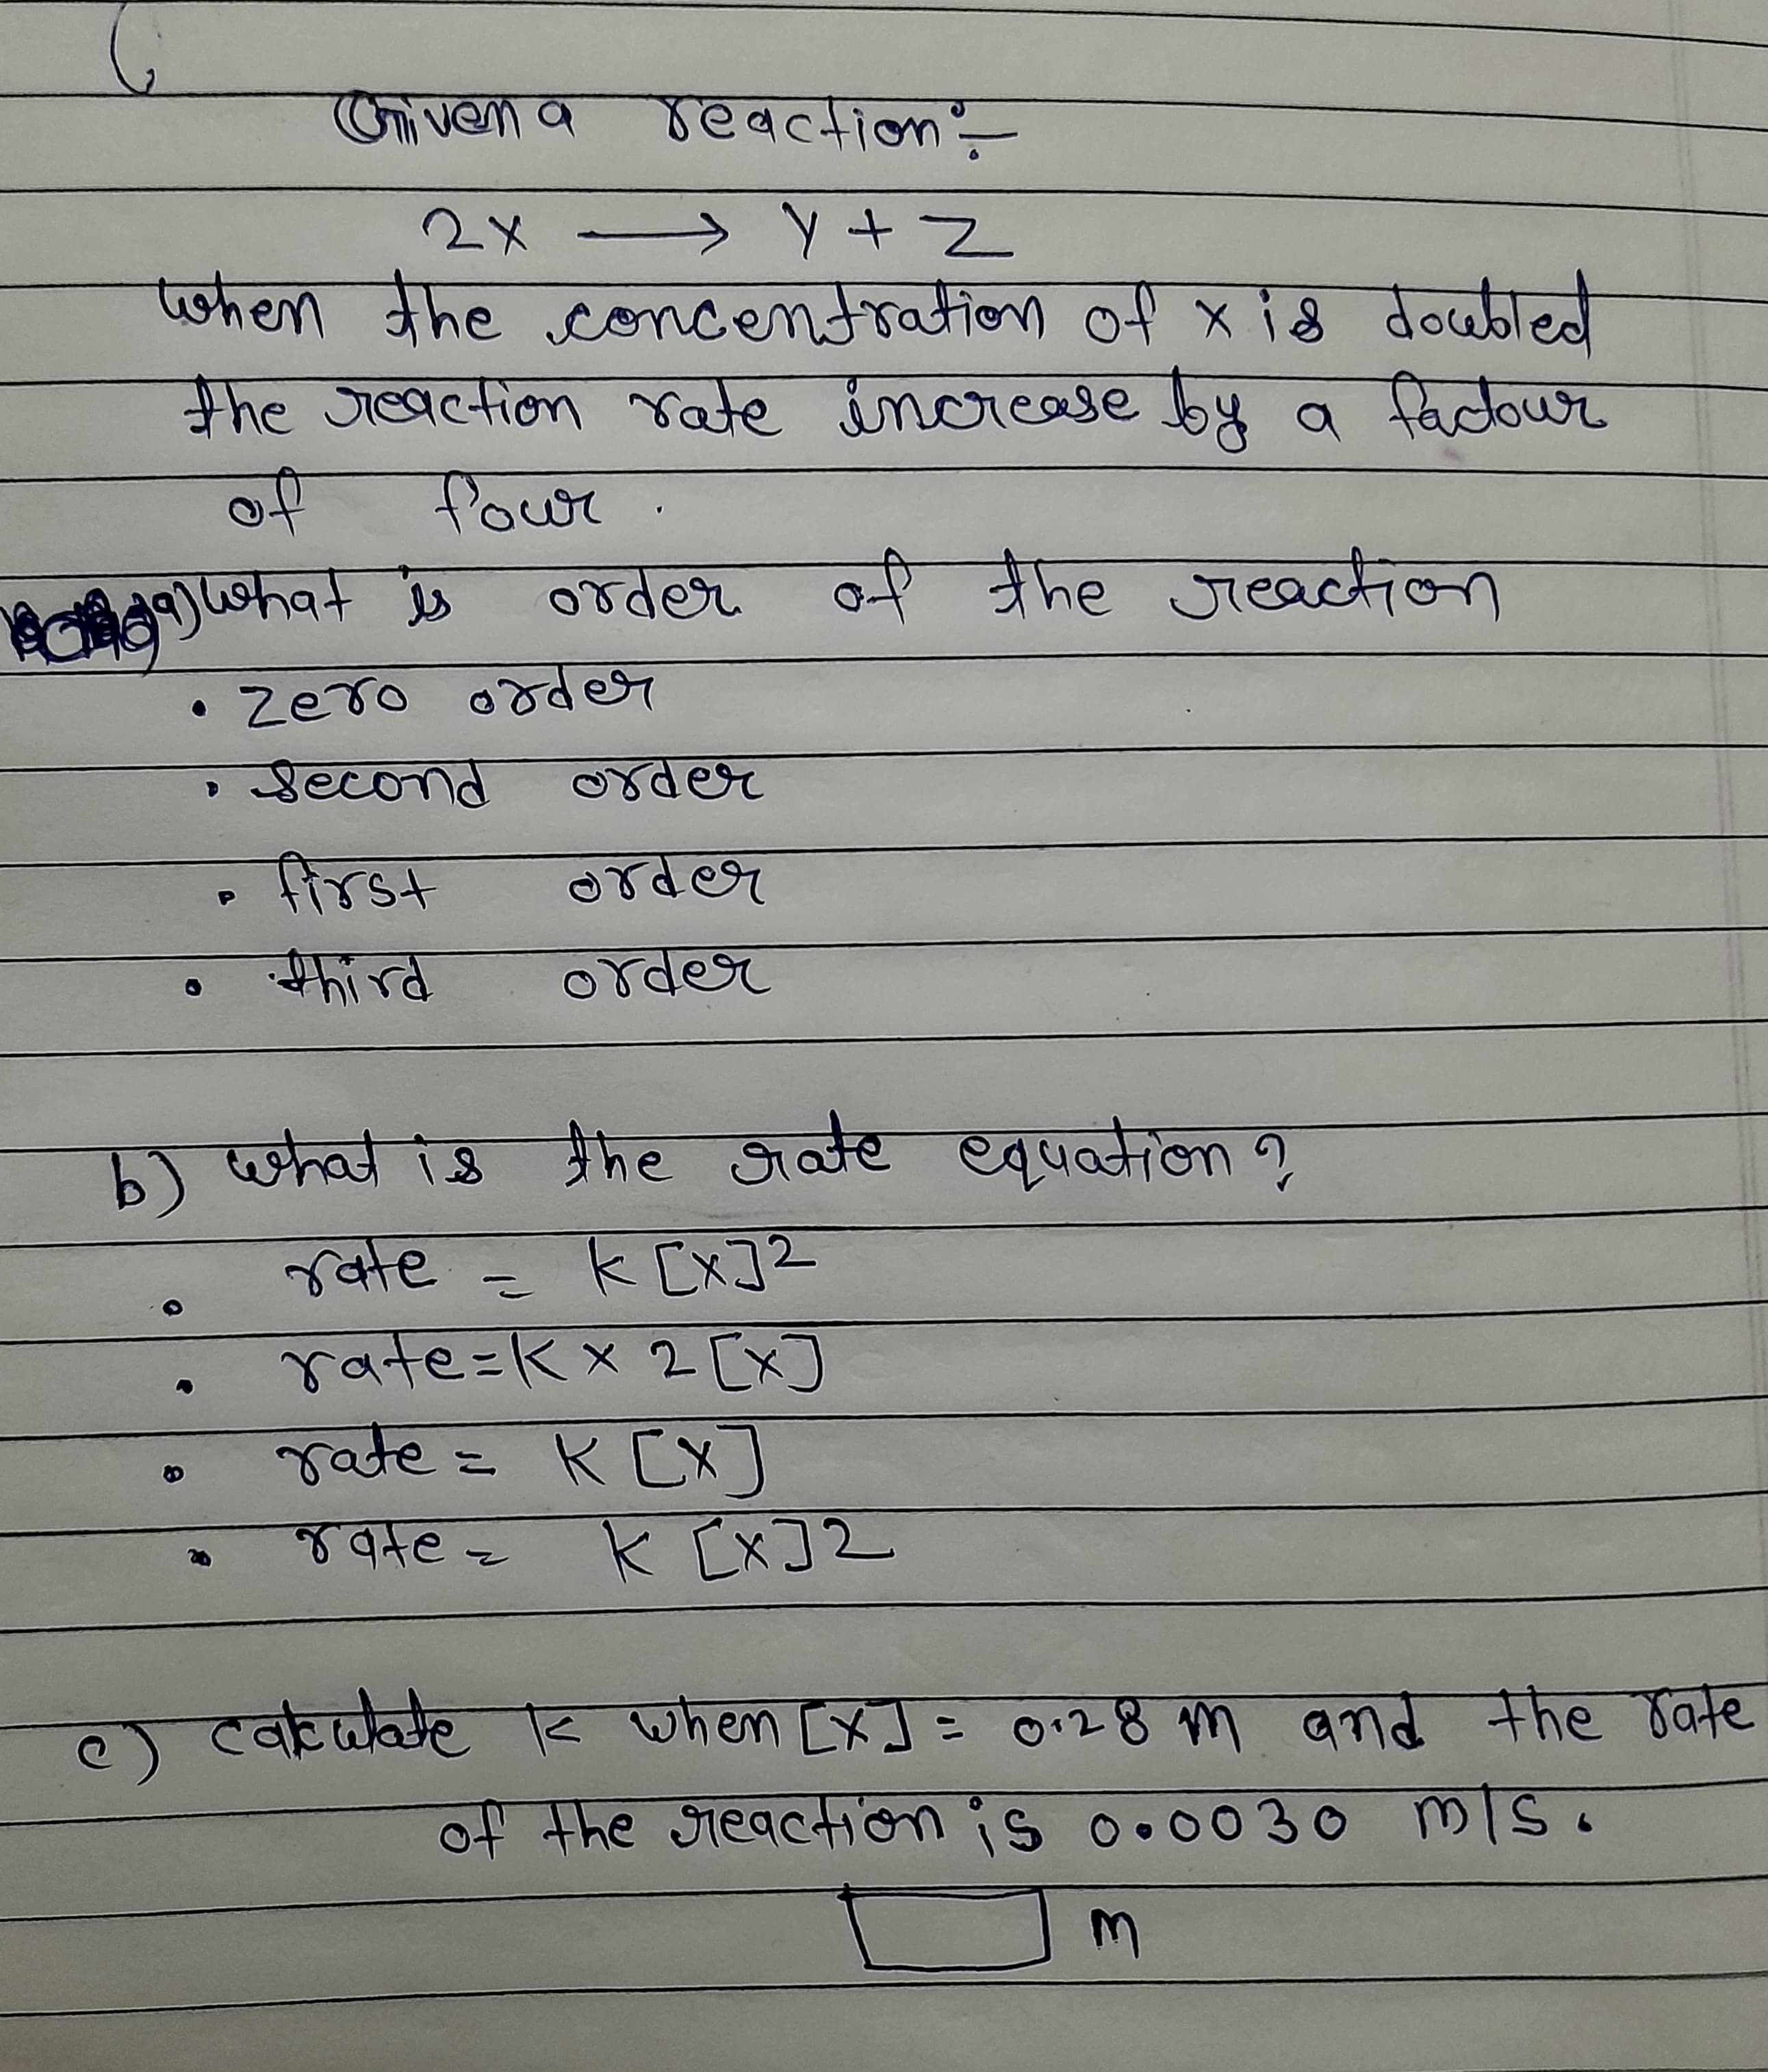 Oniven a reaction-
2x > YZ
tohen the concentration
0+ x {8 वे०्णगा
the Jieaction rate increase by a factowr
Powr
9)hat is
order of
he Jieaction
• Zero oder
Second
der
frst
rder
third
order
) प्कव hट जन्र खपनकेला?
ate= kEx]2
rate=Kx 2 [x]
rate= K CX]
K [x]2
atez
. टवचक vioल : 0"8 m बd मीए oट
when [x]= o128 m amd the Jate
of the sreaction is o.0030 MIS.
3.
